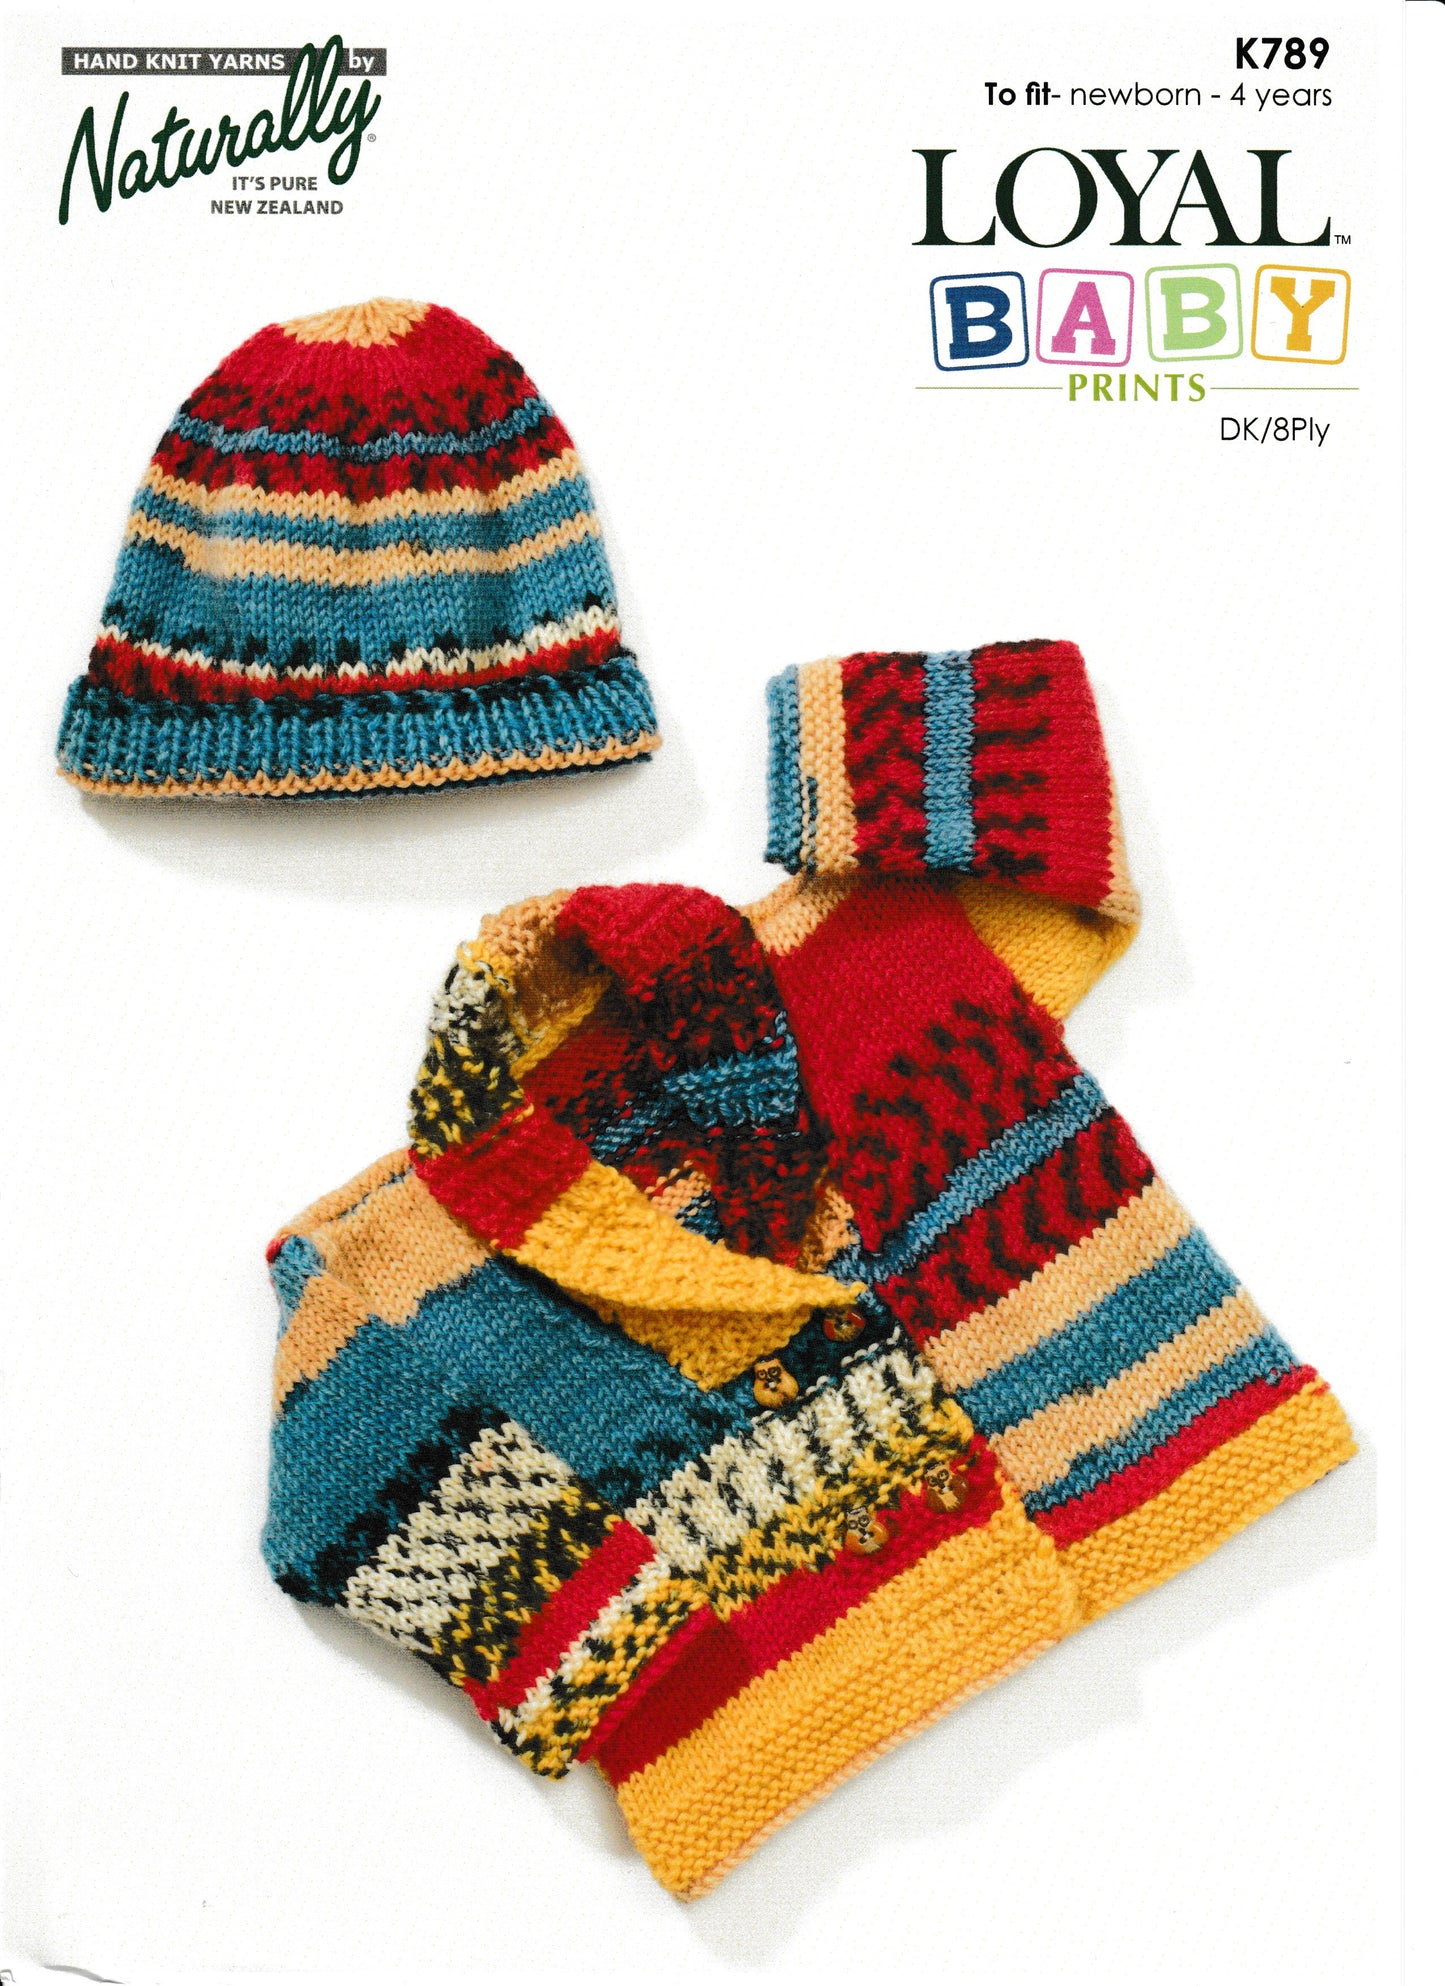 Naturally - Knit Pattern - Newborn to 4 years old - Jacket & Hat K789